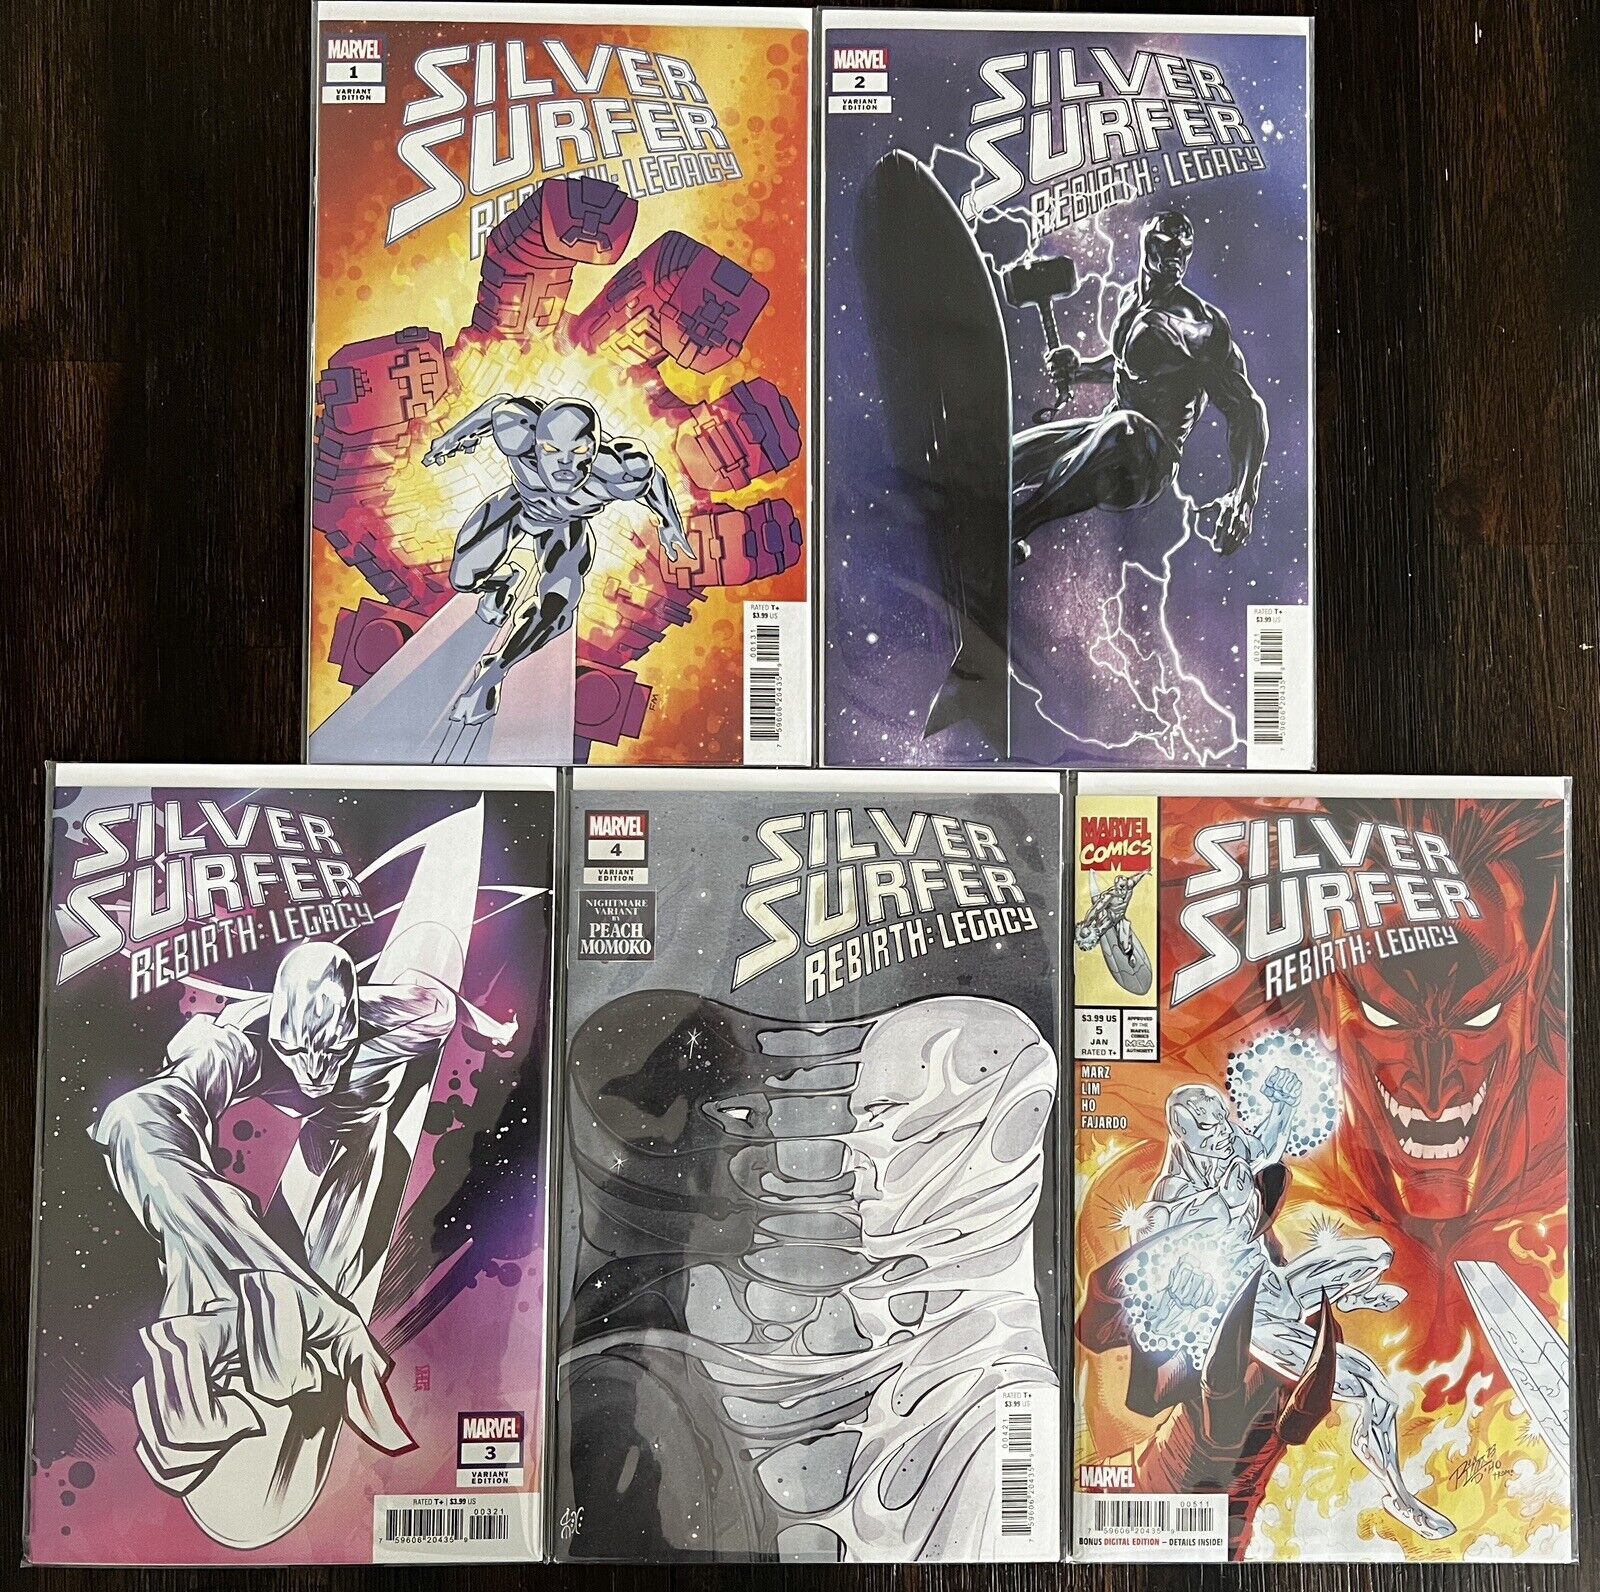 Silver Surfer Rebirth Legacy #1,2,3,4,5 Complete Story VF/NM